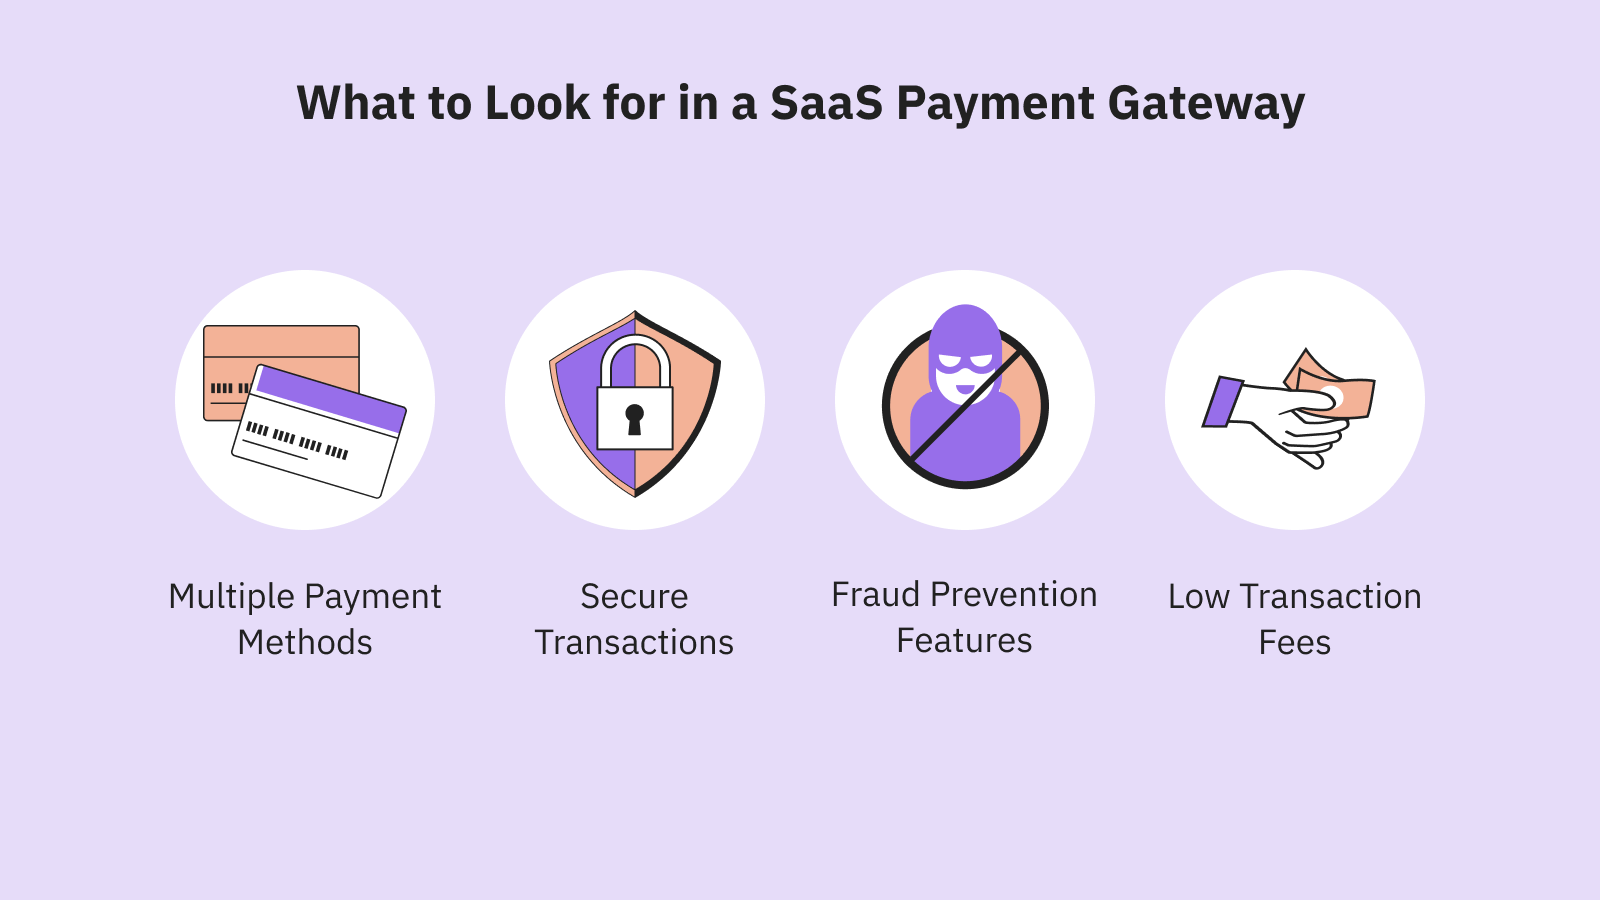 What Should Subscription Companies Look for in Payment Gateways?